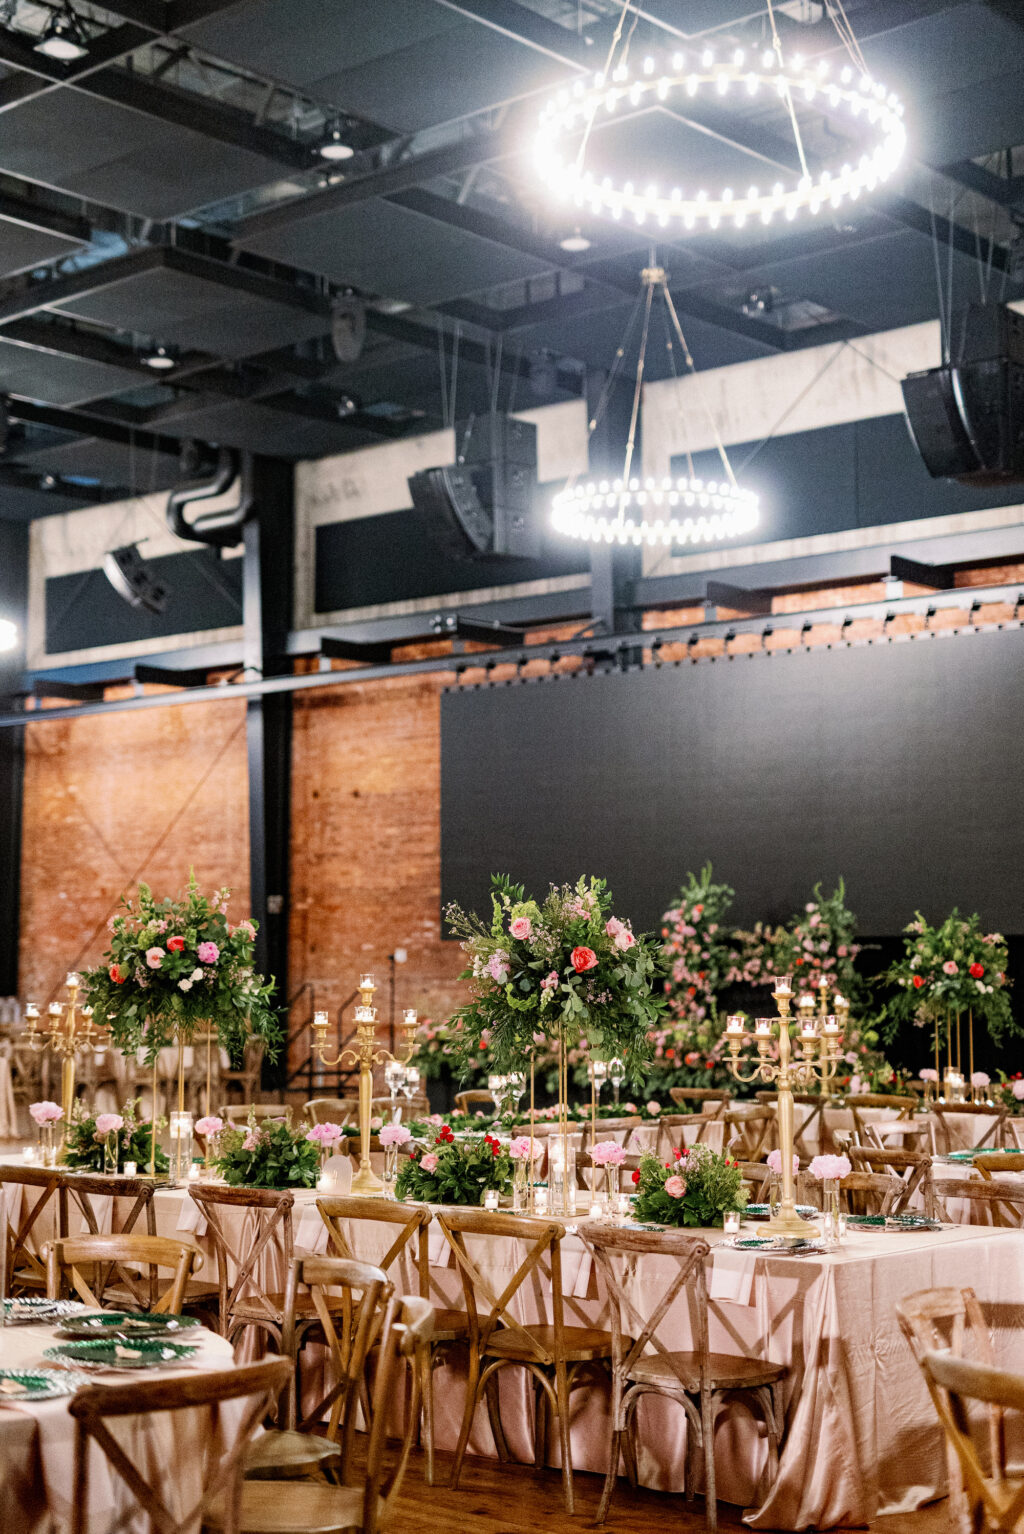 Romantic Wedding Ideas | Long Feasting Tables with Gold Candelabras and Tall Flower Stand Centerpieces with Eucalyptus, Pink and Red Roses | Tampa Bay Rentals A Chair Affair